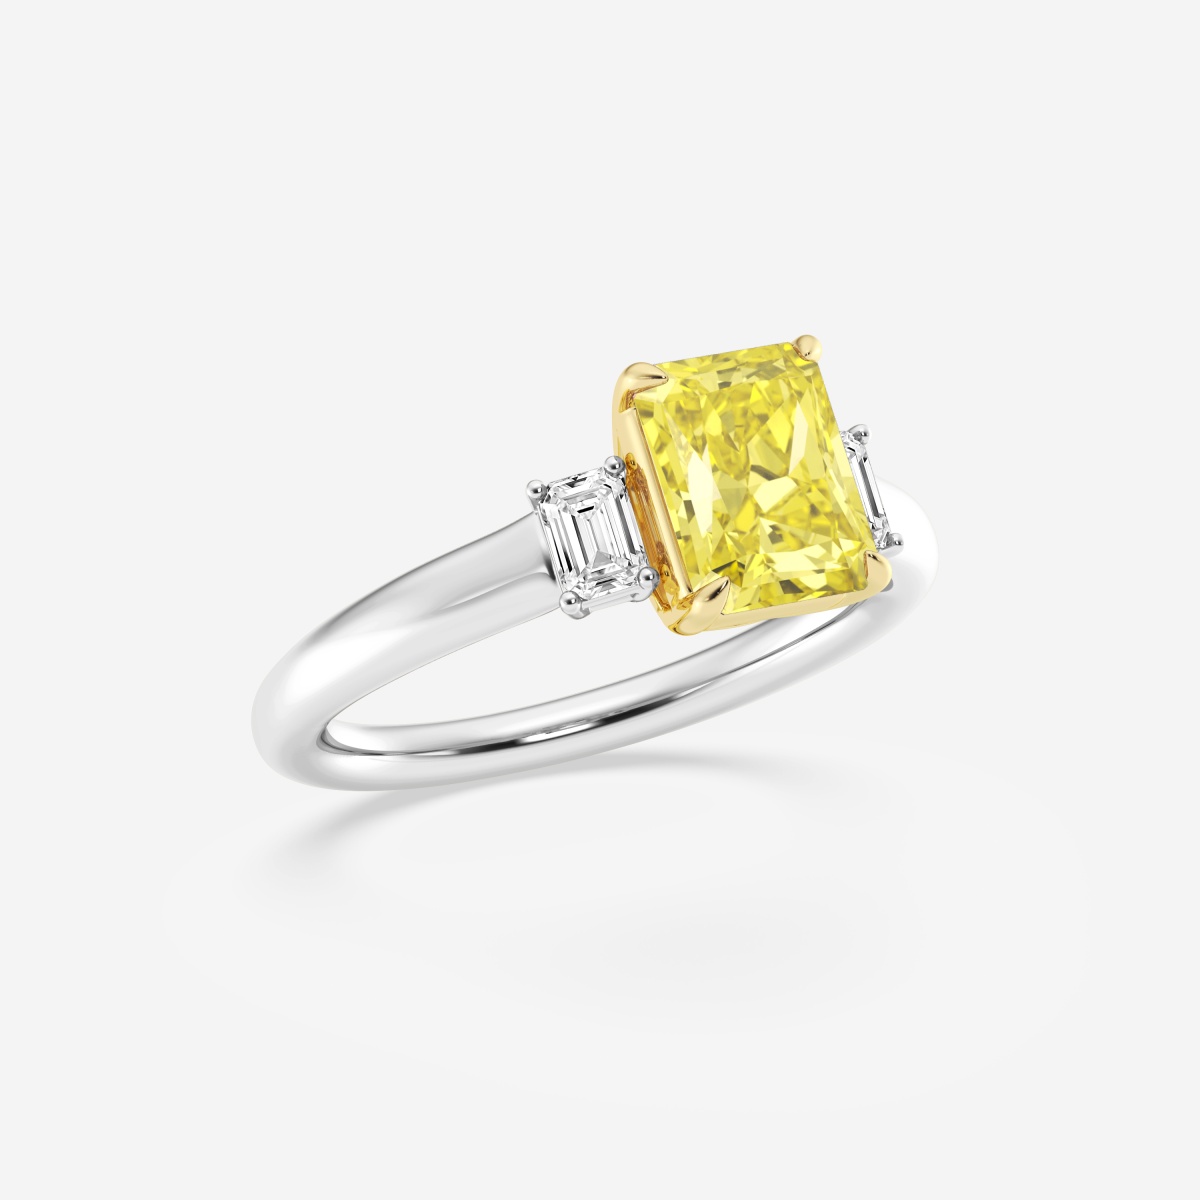 Additional Image 1 for  1 7/8 ctw Radiant Lab Grown Diamond Fancy Yellow With Side Emerald Cuts Three-Stone Engagement Ring